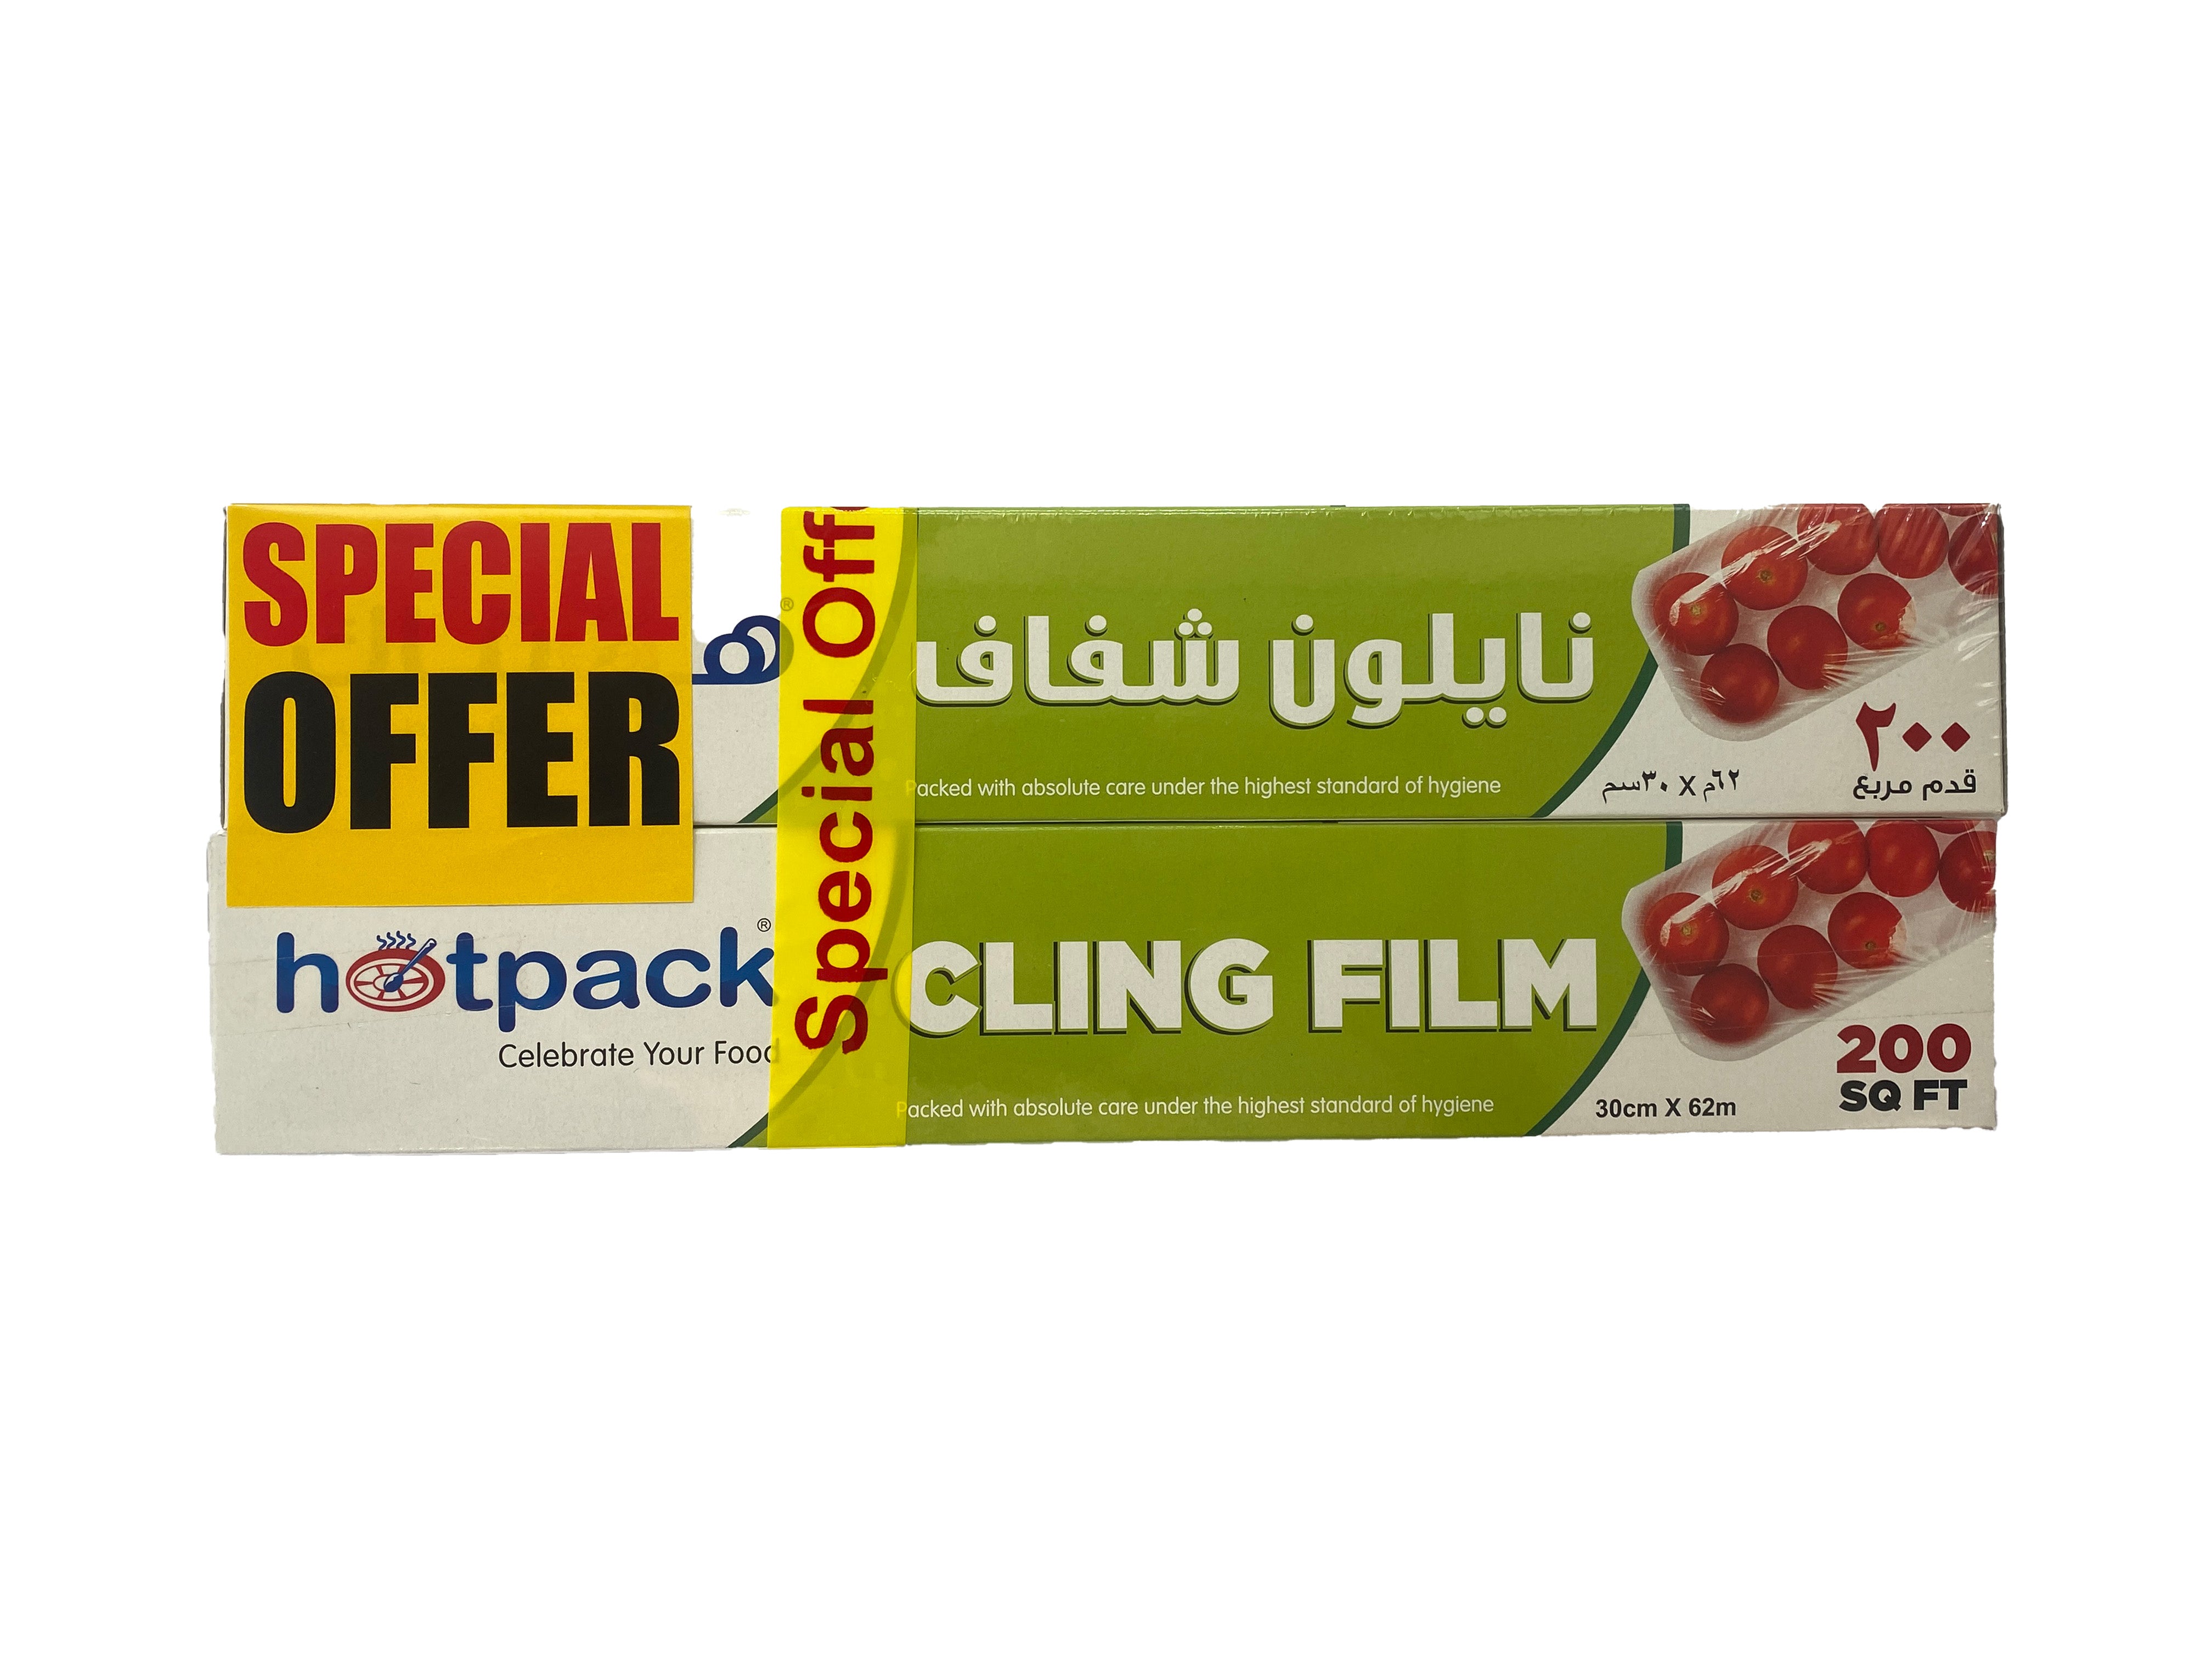 Cling Film - Twin Pack Offer